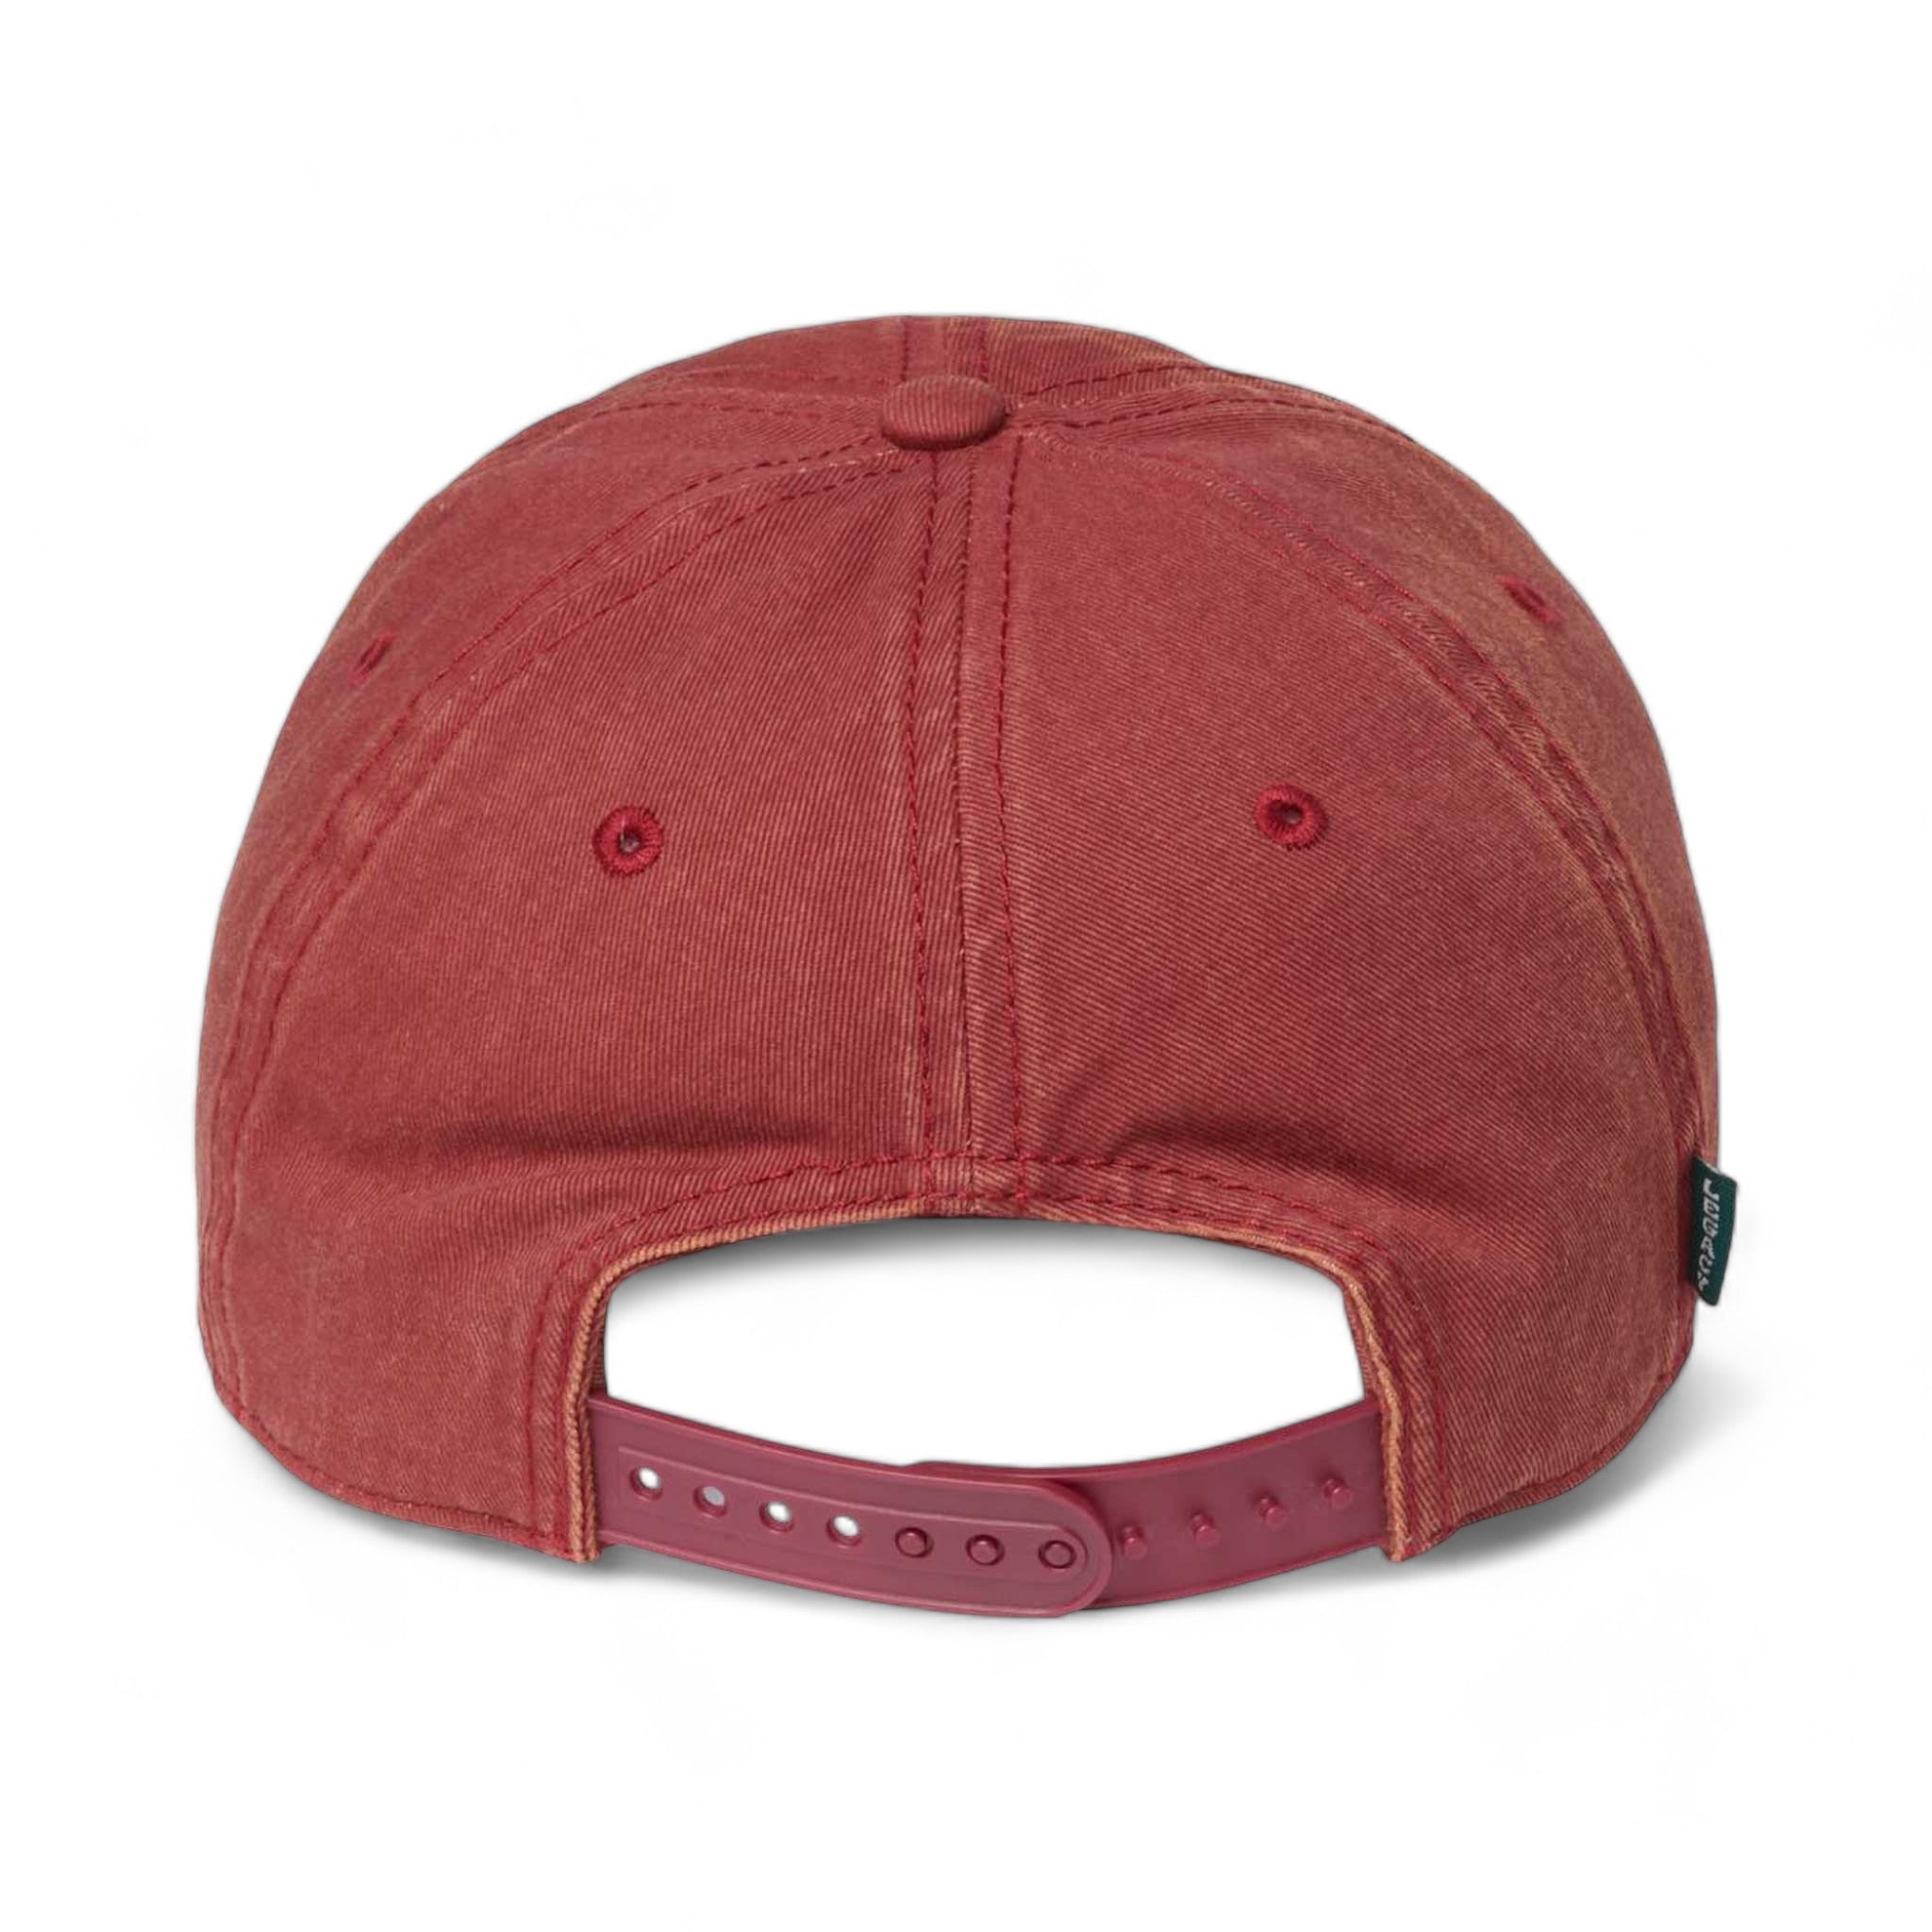 Back view of LEGACY OFAST custom hat in cardinal